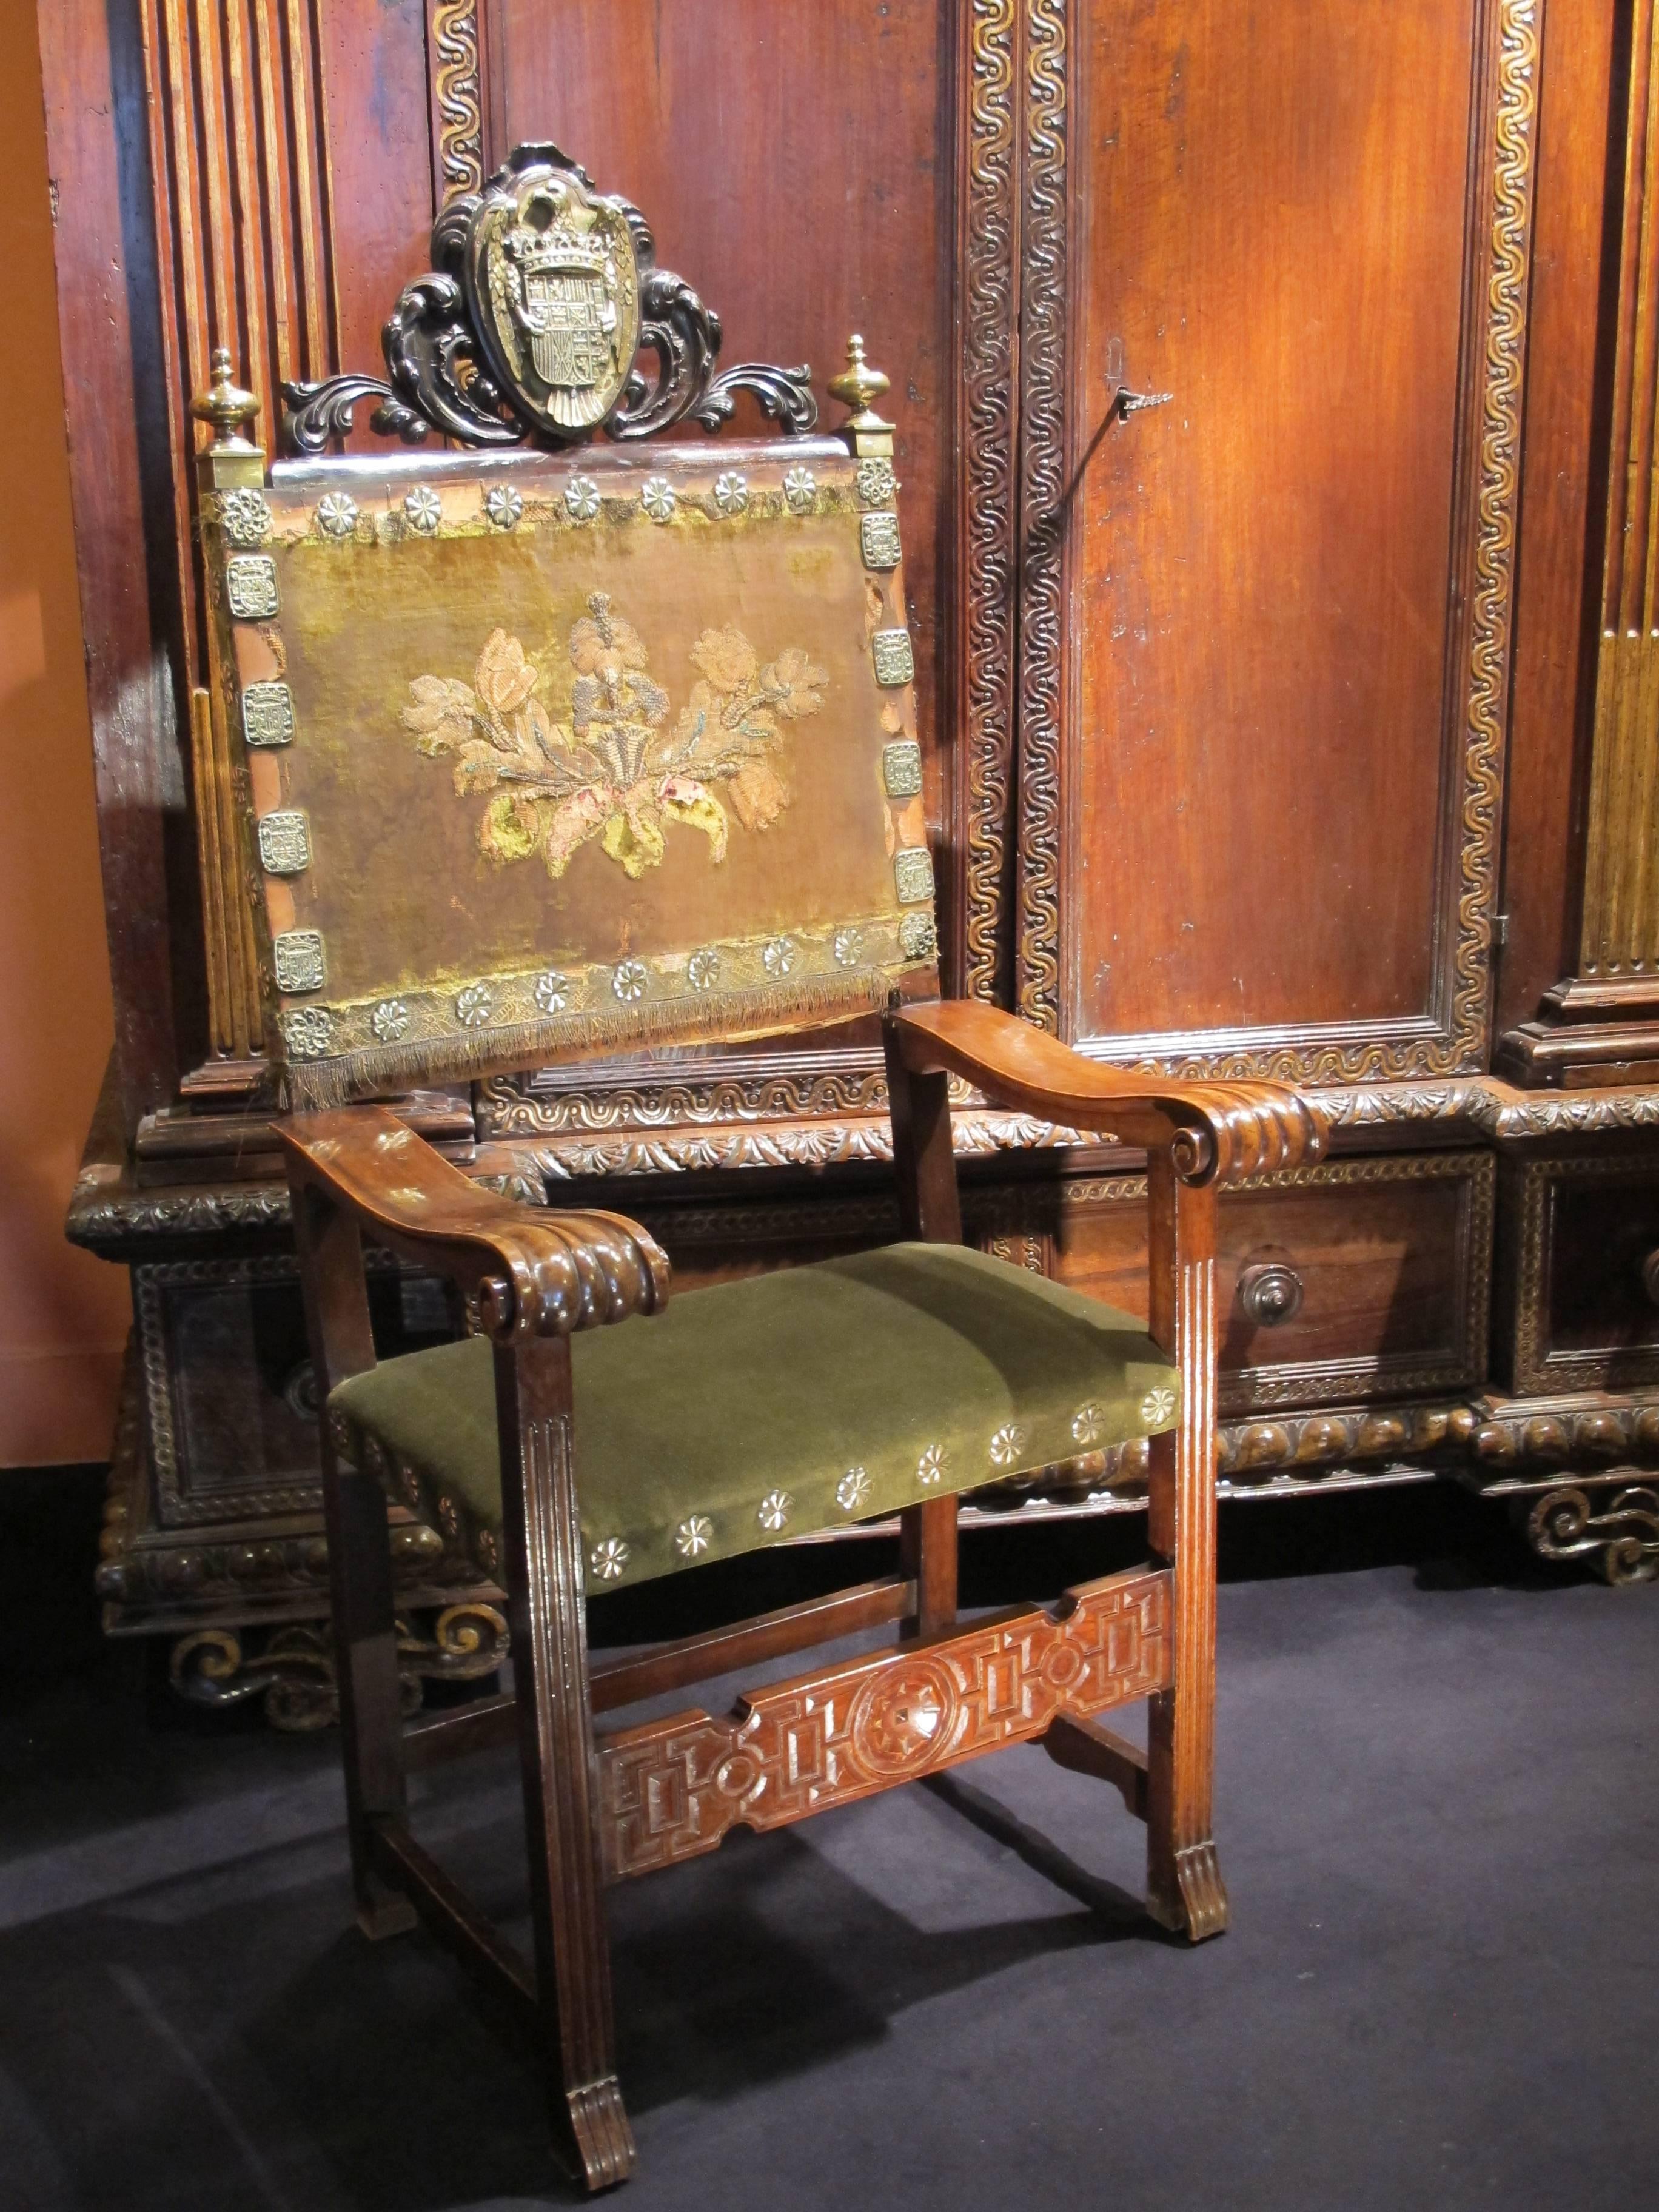 Origin: Spain
Period: 19th century

Height: 144 cm 
Height of seat: 50 cm
Length: 66.5 cm
Depth: 50 cm 

Provenance:
A manuscript note is to be found under the seat « Sillon Gradero from the Palace at Saint Sebastian from Collection of